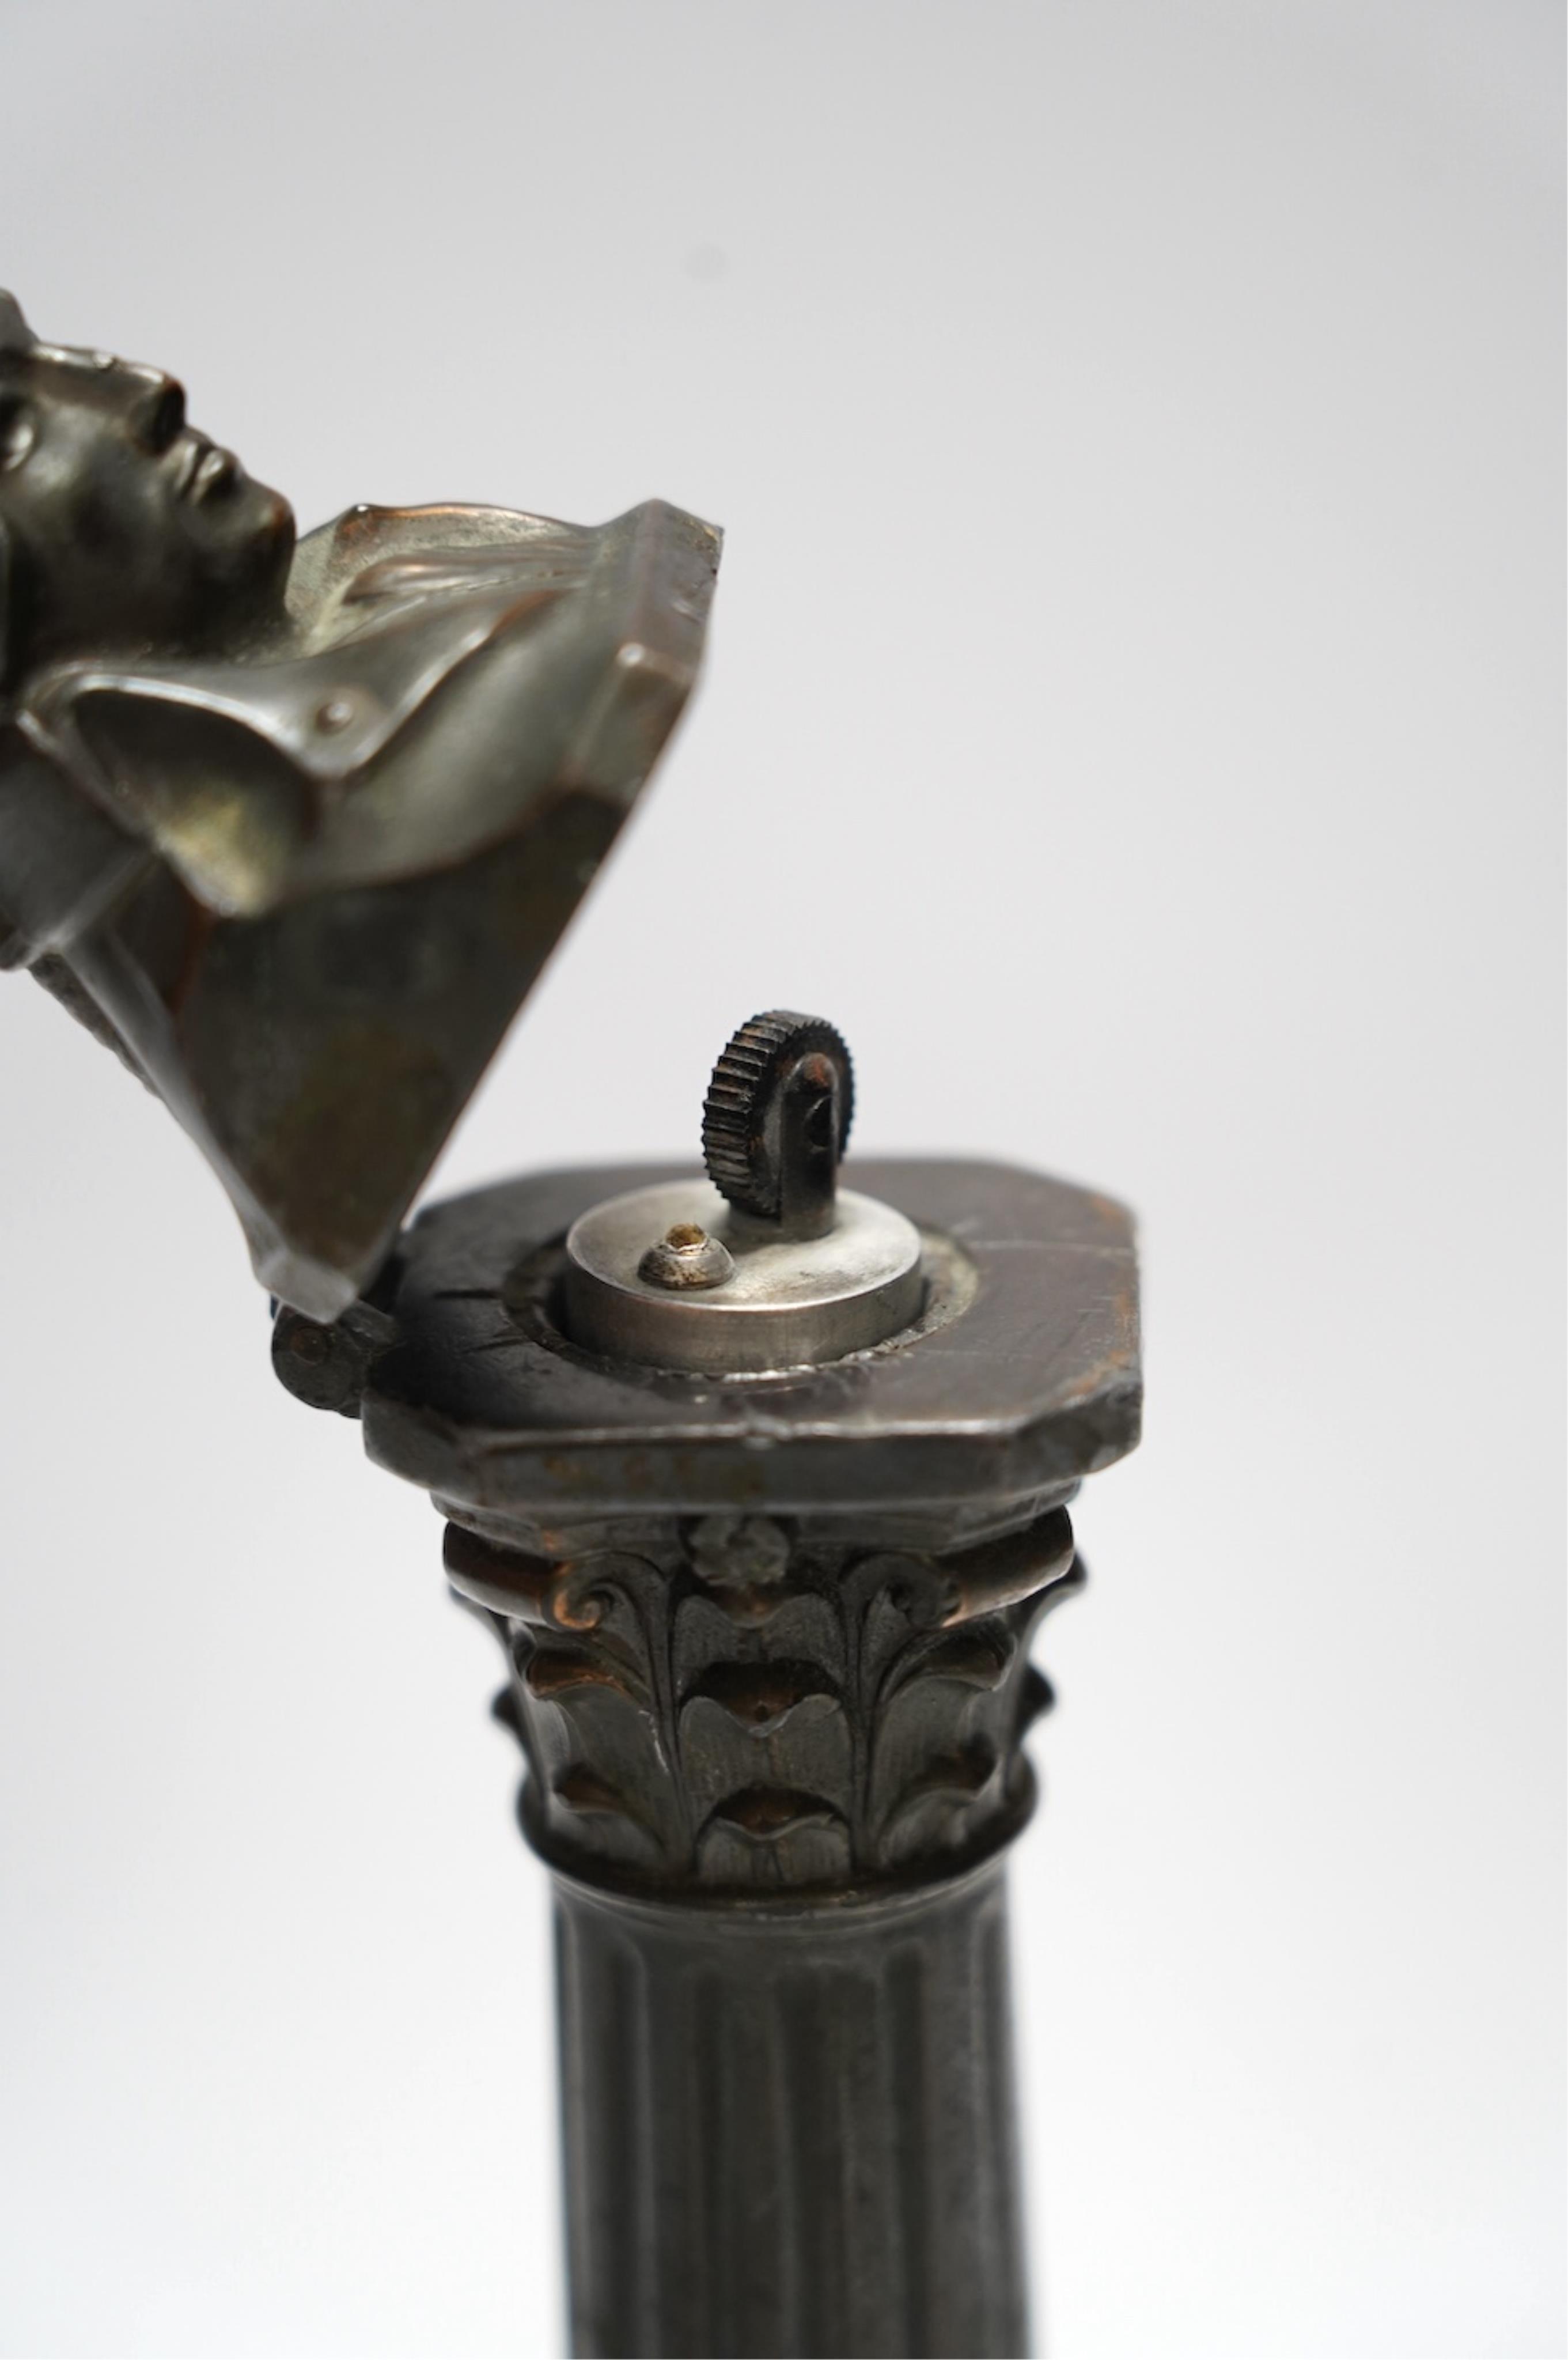 A spelter bust of Lord Nelson on a column table lighter, 25cm high. Condition - poor to fair, hinge broken, untested